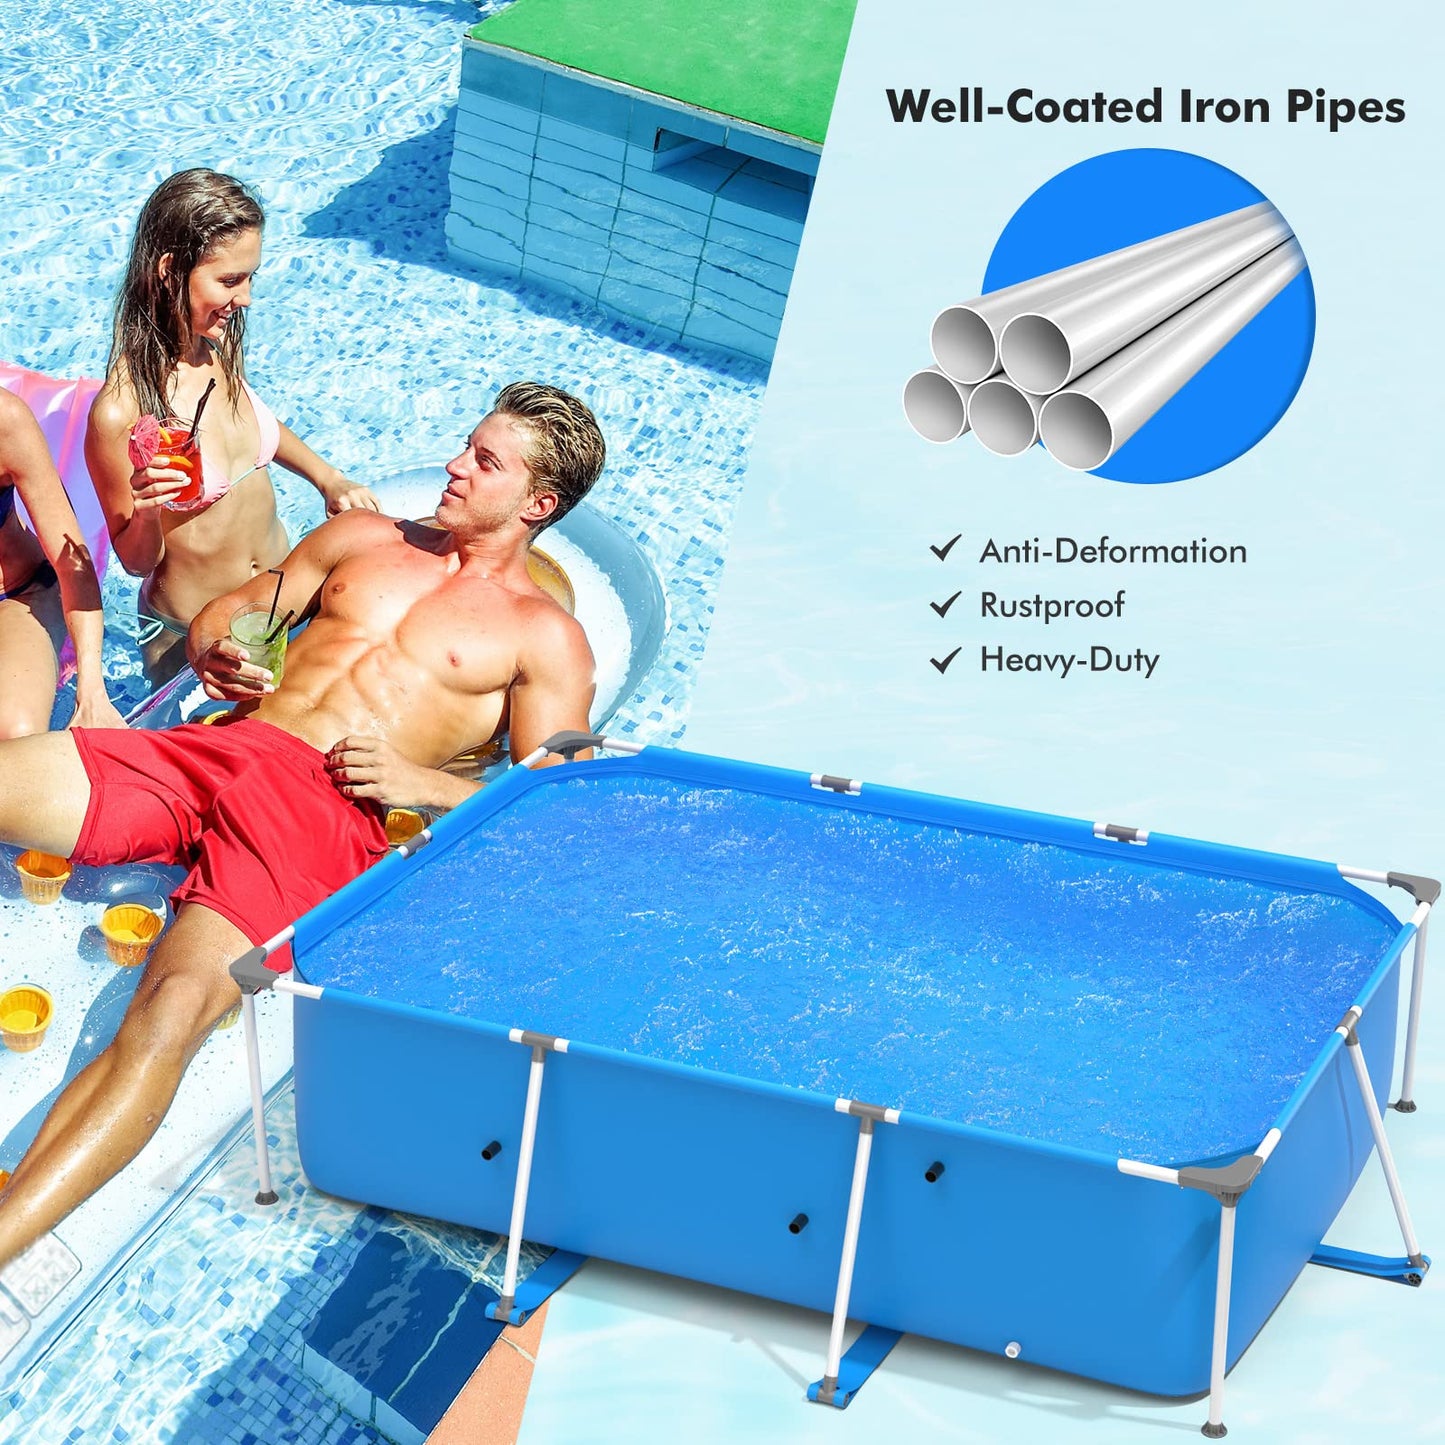 Goplus Frame Swimming Pool, 10ft x 6.7ft x 30in Rectangular Above Ground Pools W/Steel Frame, Pool Cover, Easy Setup & Drainage, Family Pool for Backyard, Garden,Patio, Balcony (Blue) Blue